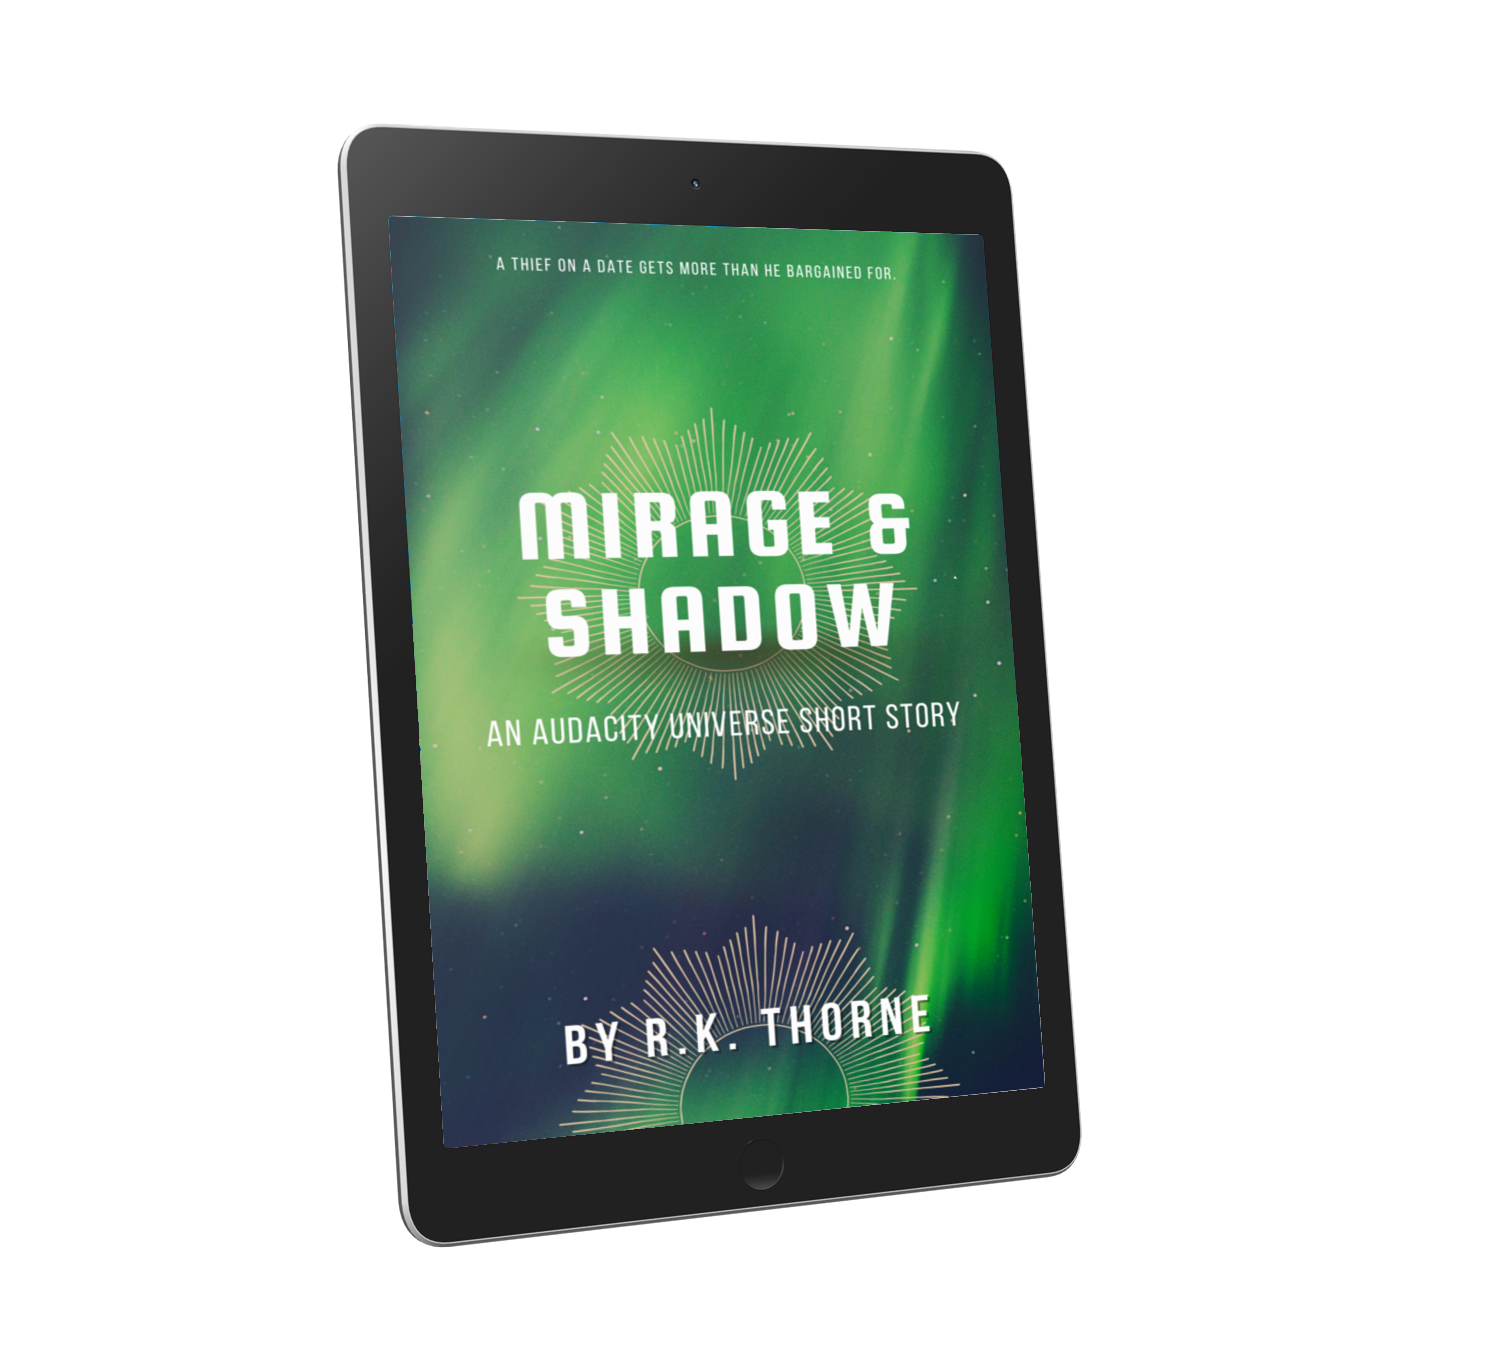 Cover image of Mirage and Shadow short story shown on a Kindle or black device